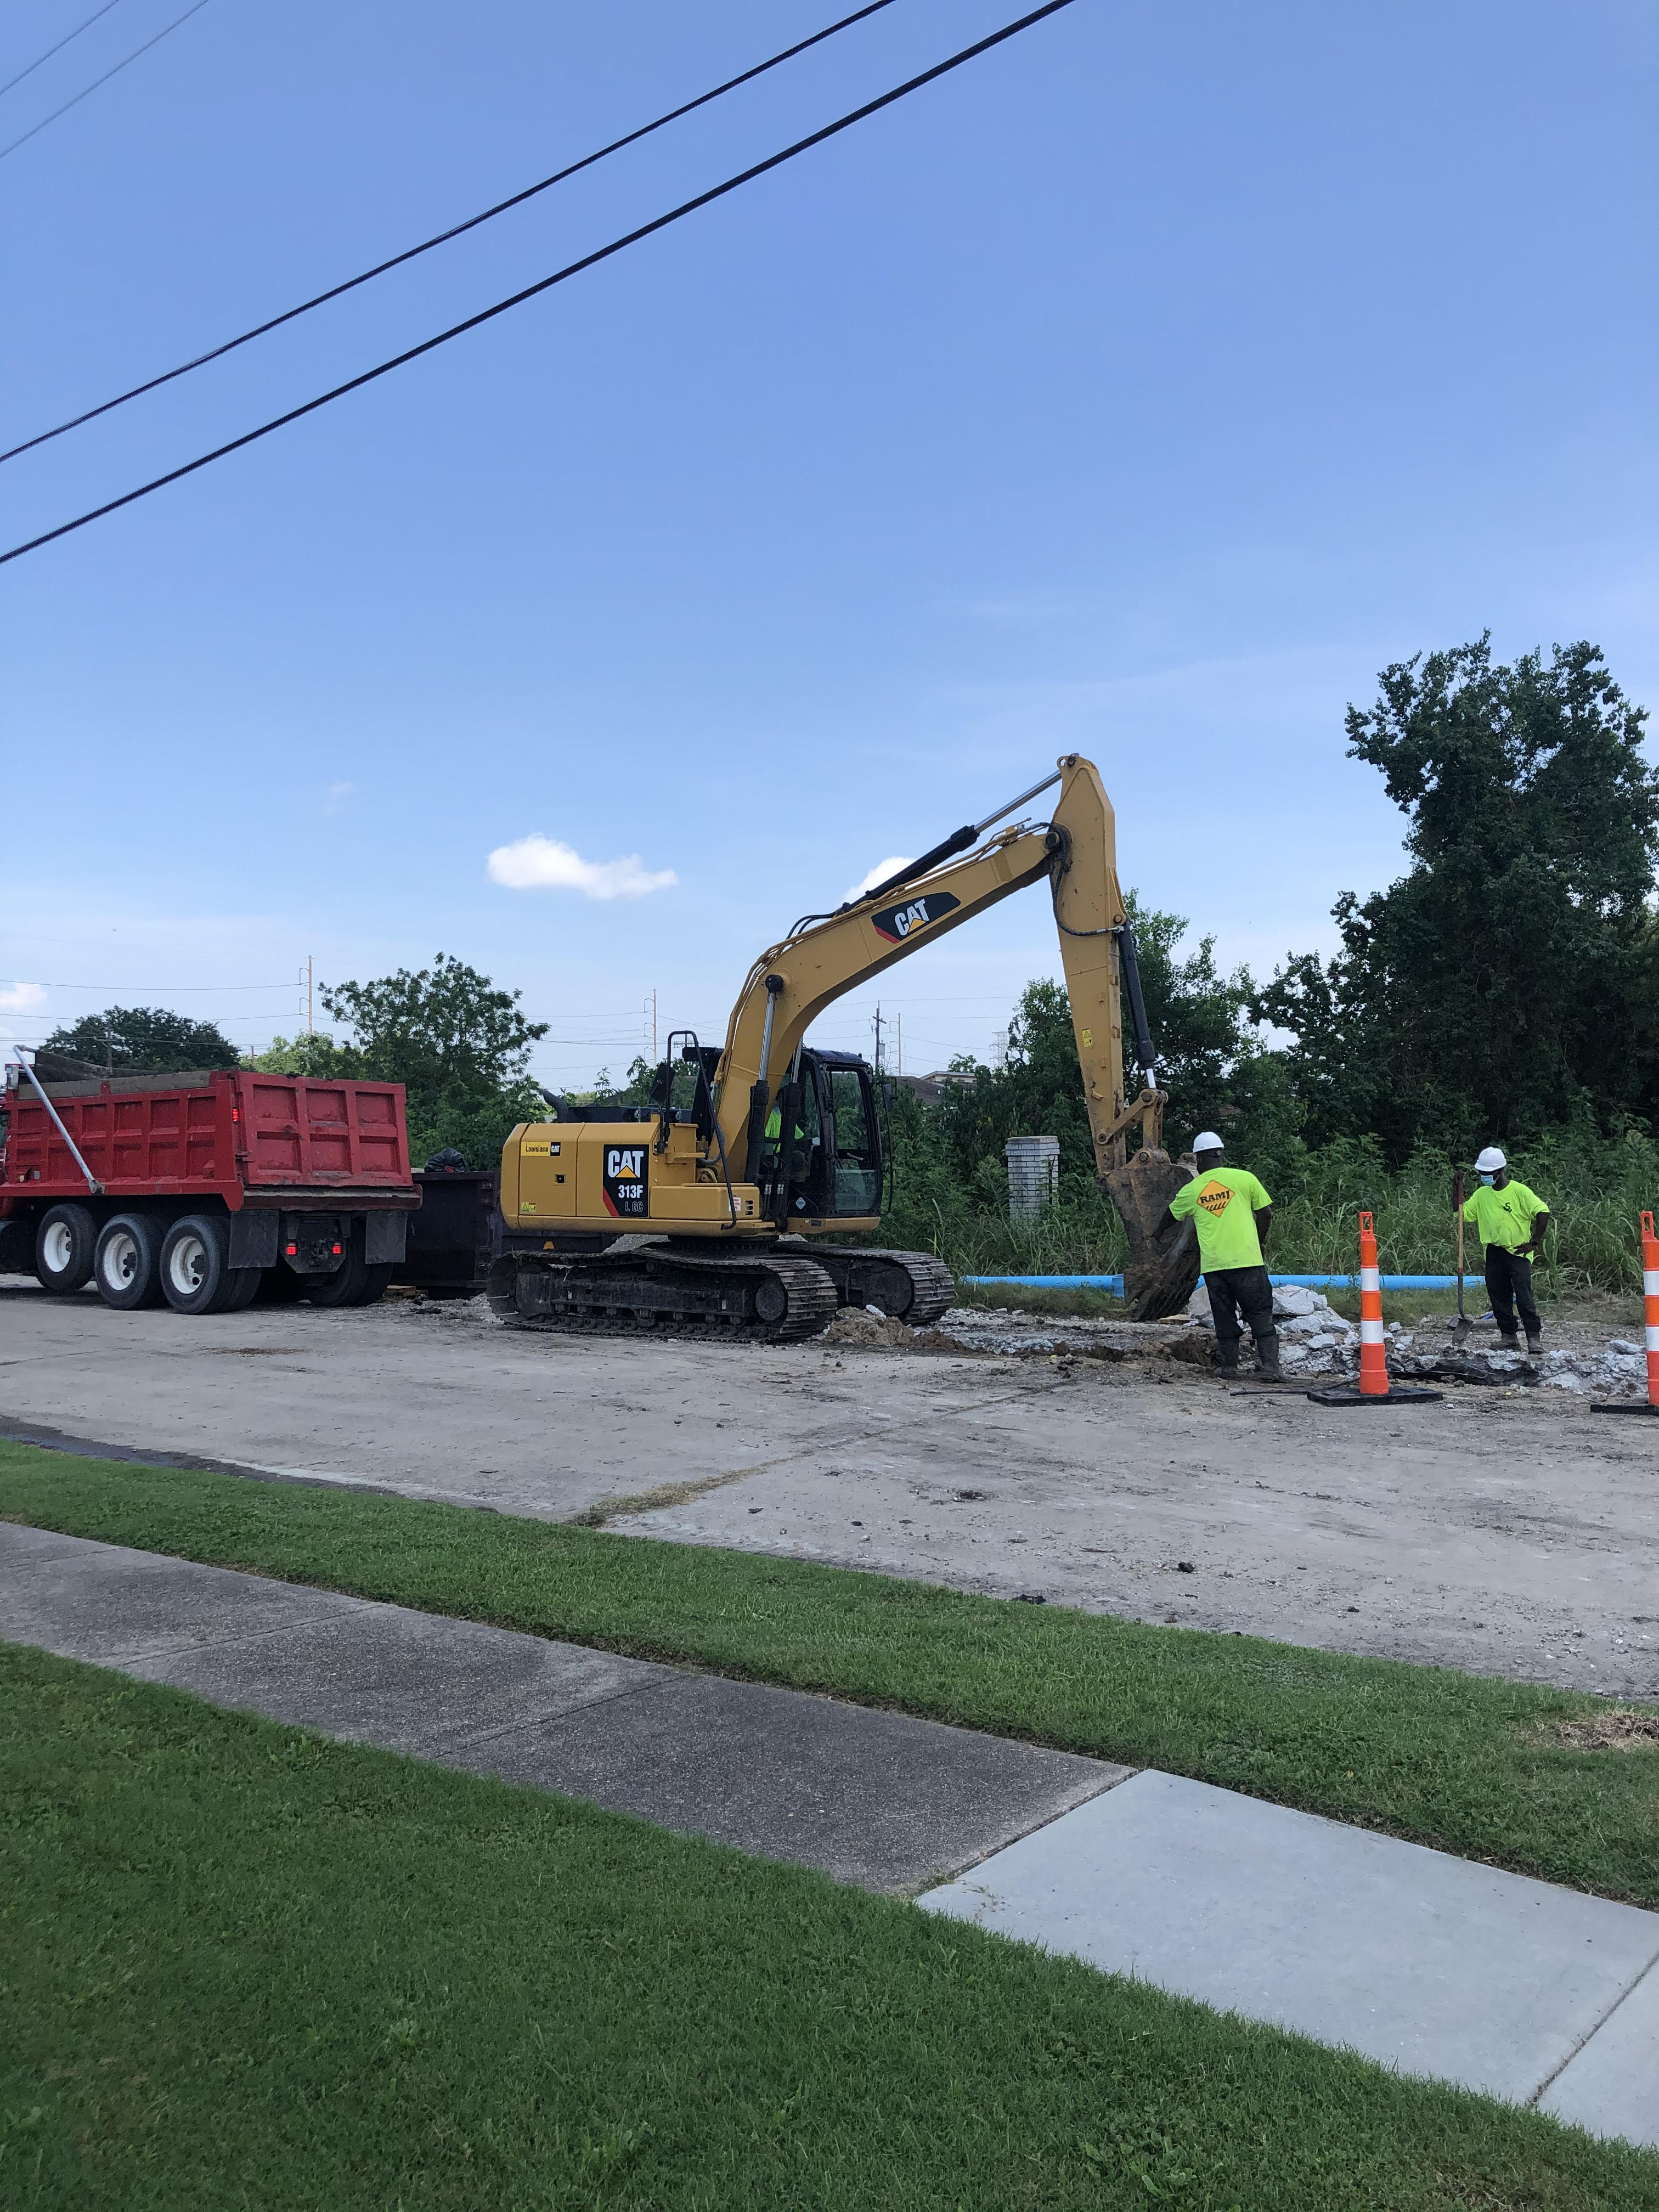 WORK BEGINS ON THE LOWER NINTH WARD NORTHEAST GROUP B  PROJECT